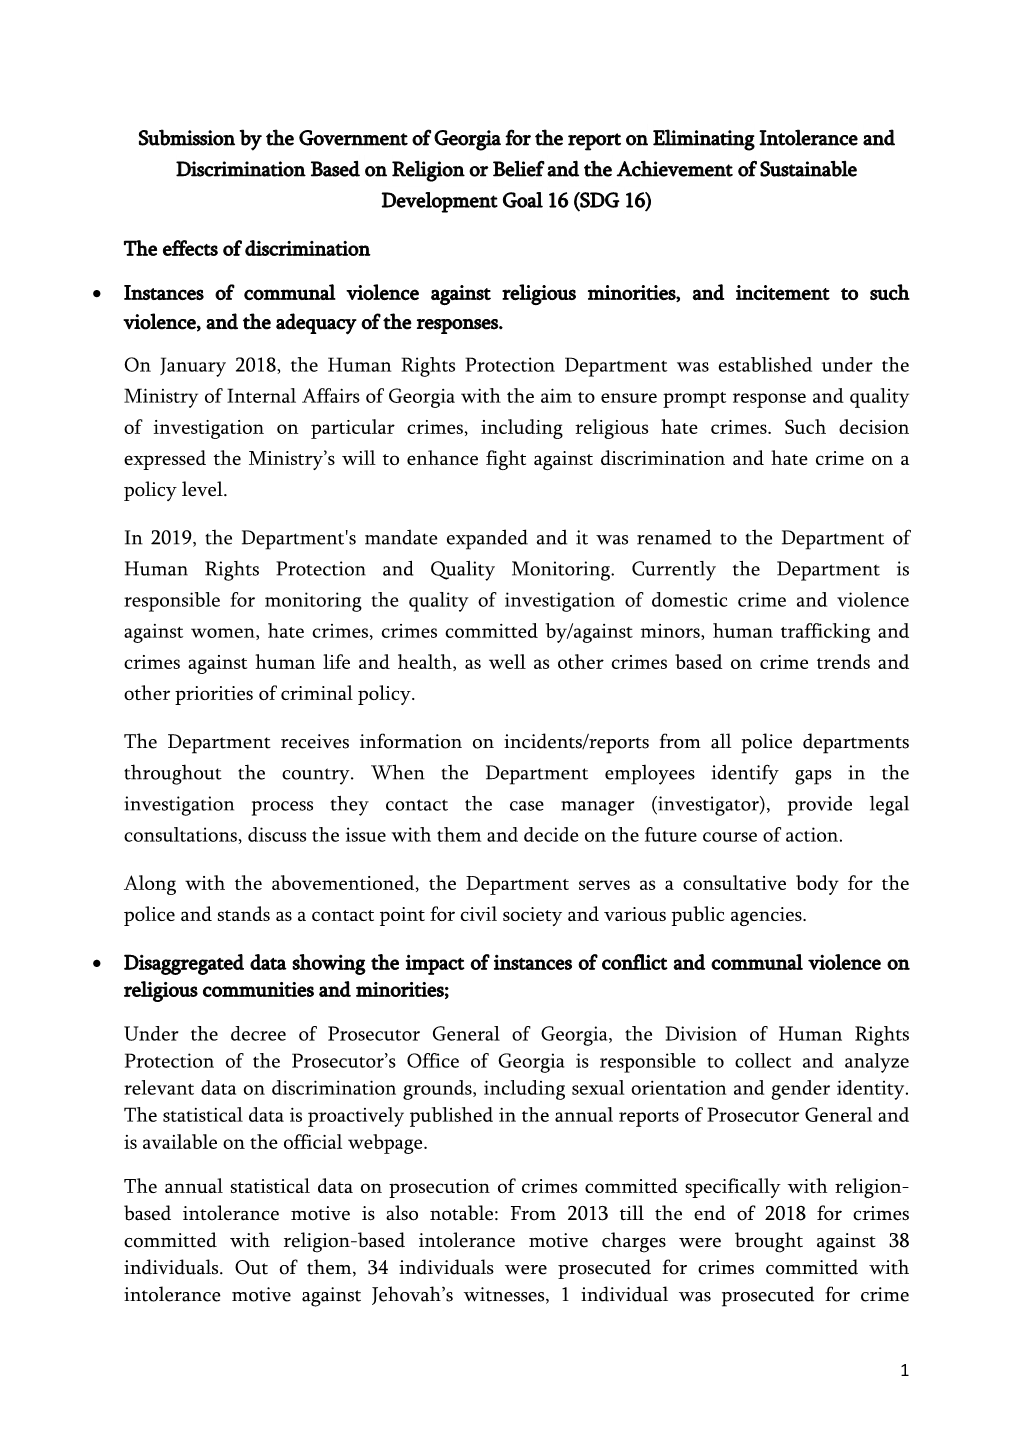 Georgia for the Report on Eliminating Intolerance and Discrimination Based on Religion Or Belief and the Achievement of Sustainable Development Goal 16 (SDG 16)